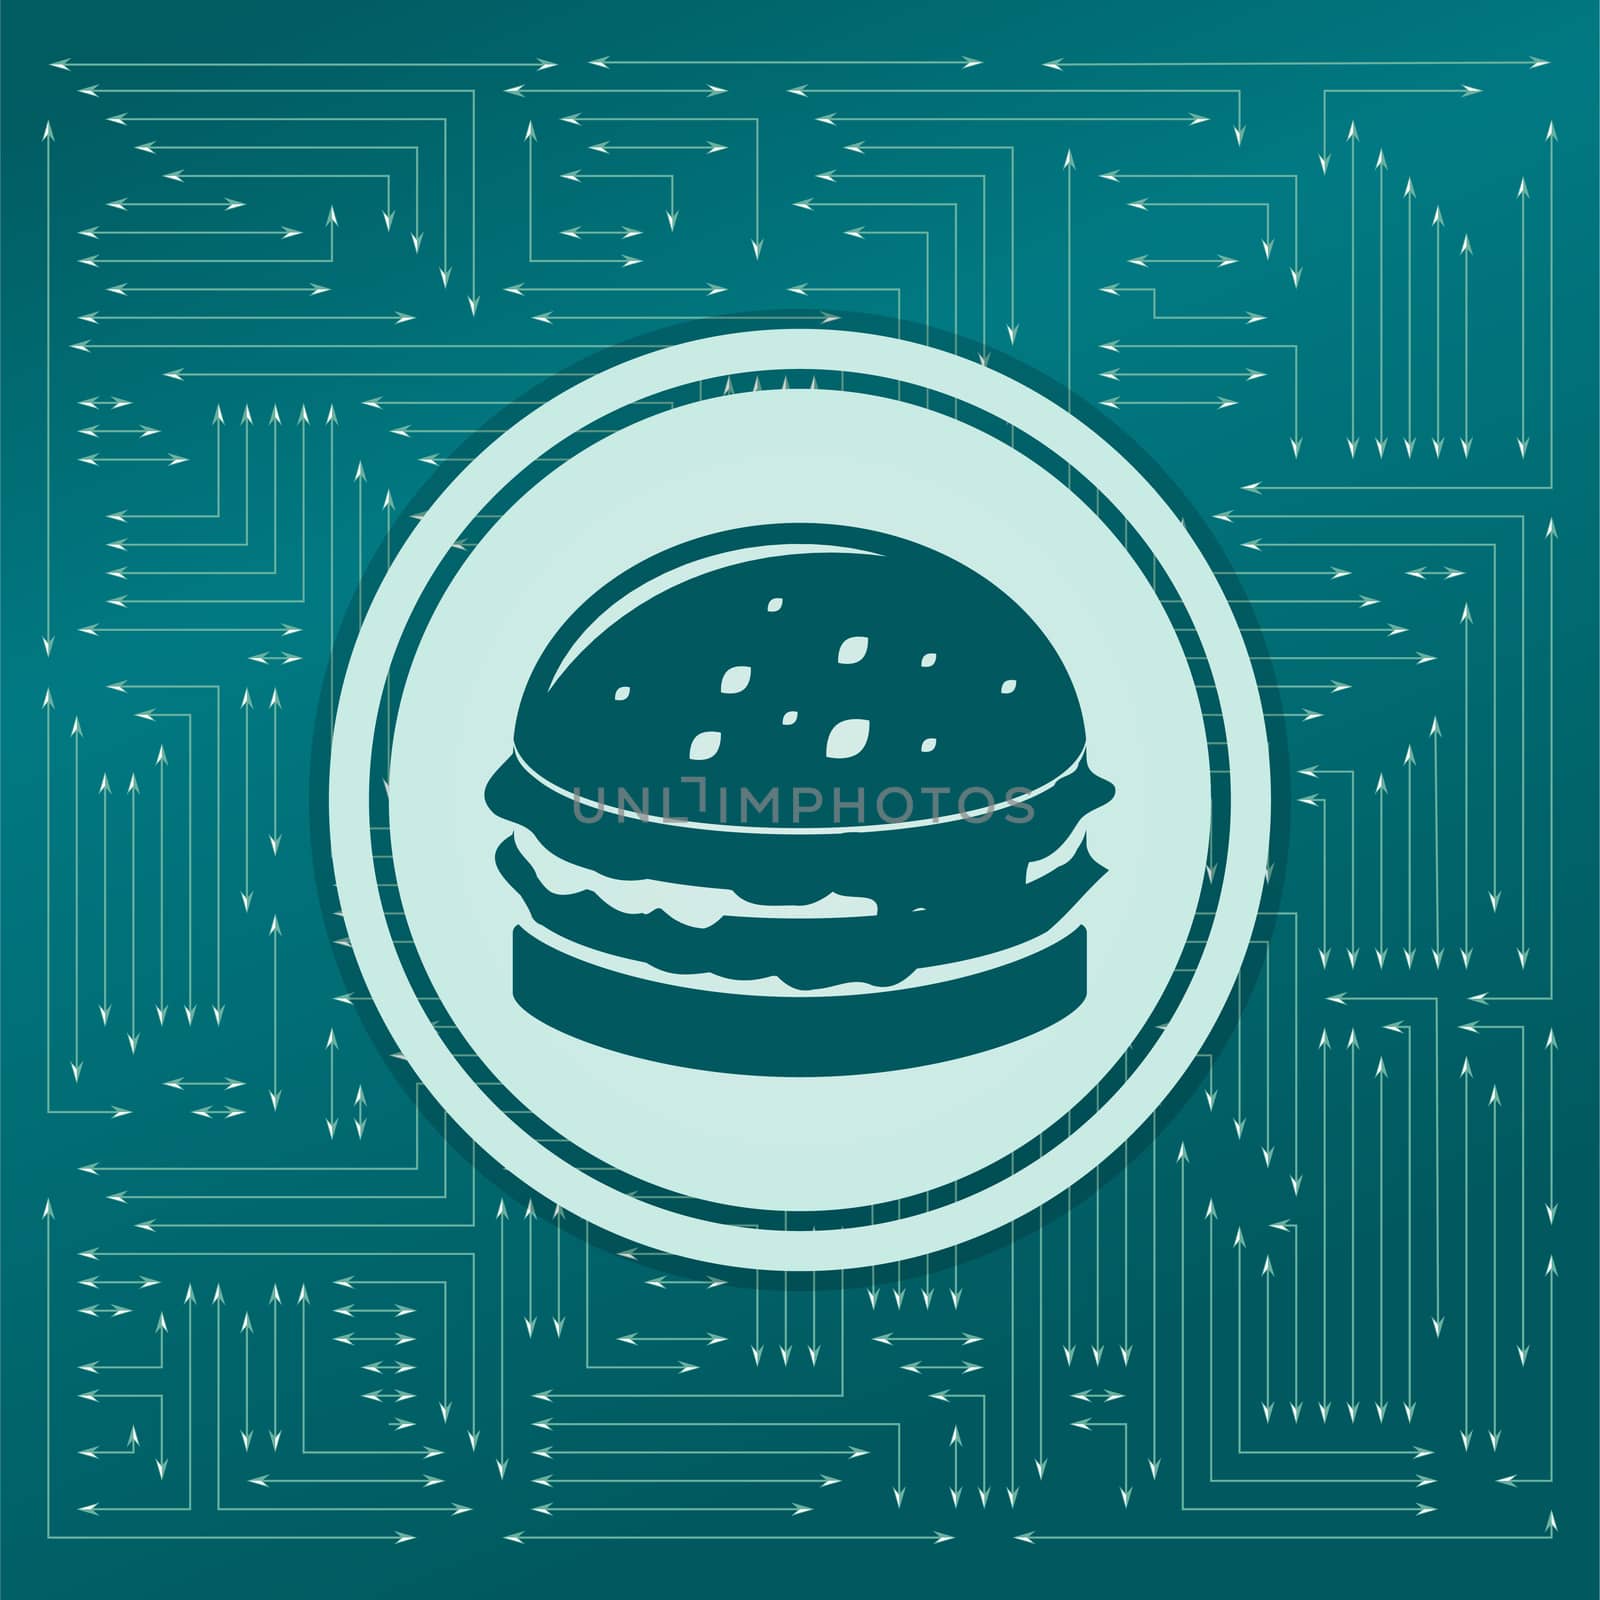 Burger, sandwich, hamburger icon on a green background, with arrows in different directions. It appears the electronic board.  by Adamchuk